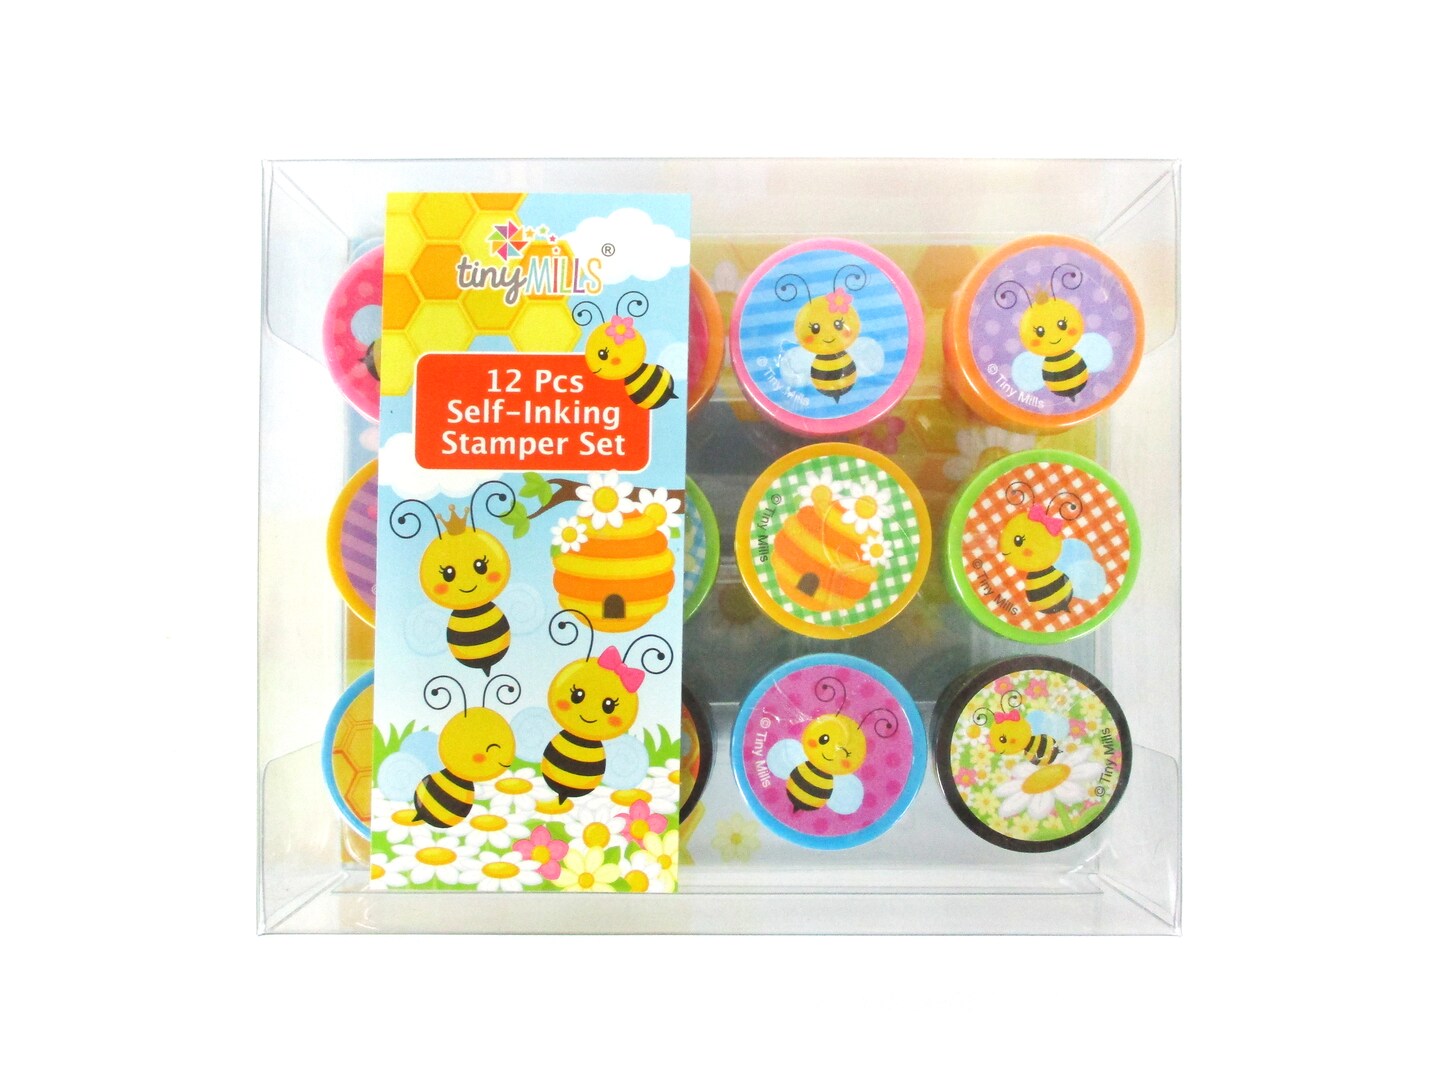 TINYMILLS 12 Pcs Bees Honeybees Bumble Bee Stamp Kit